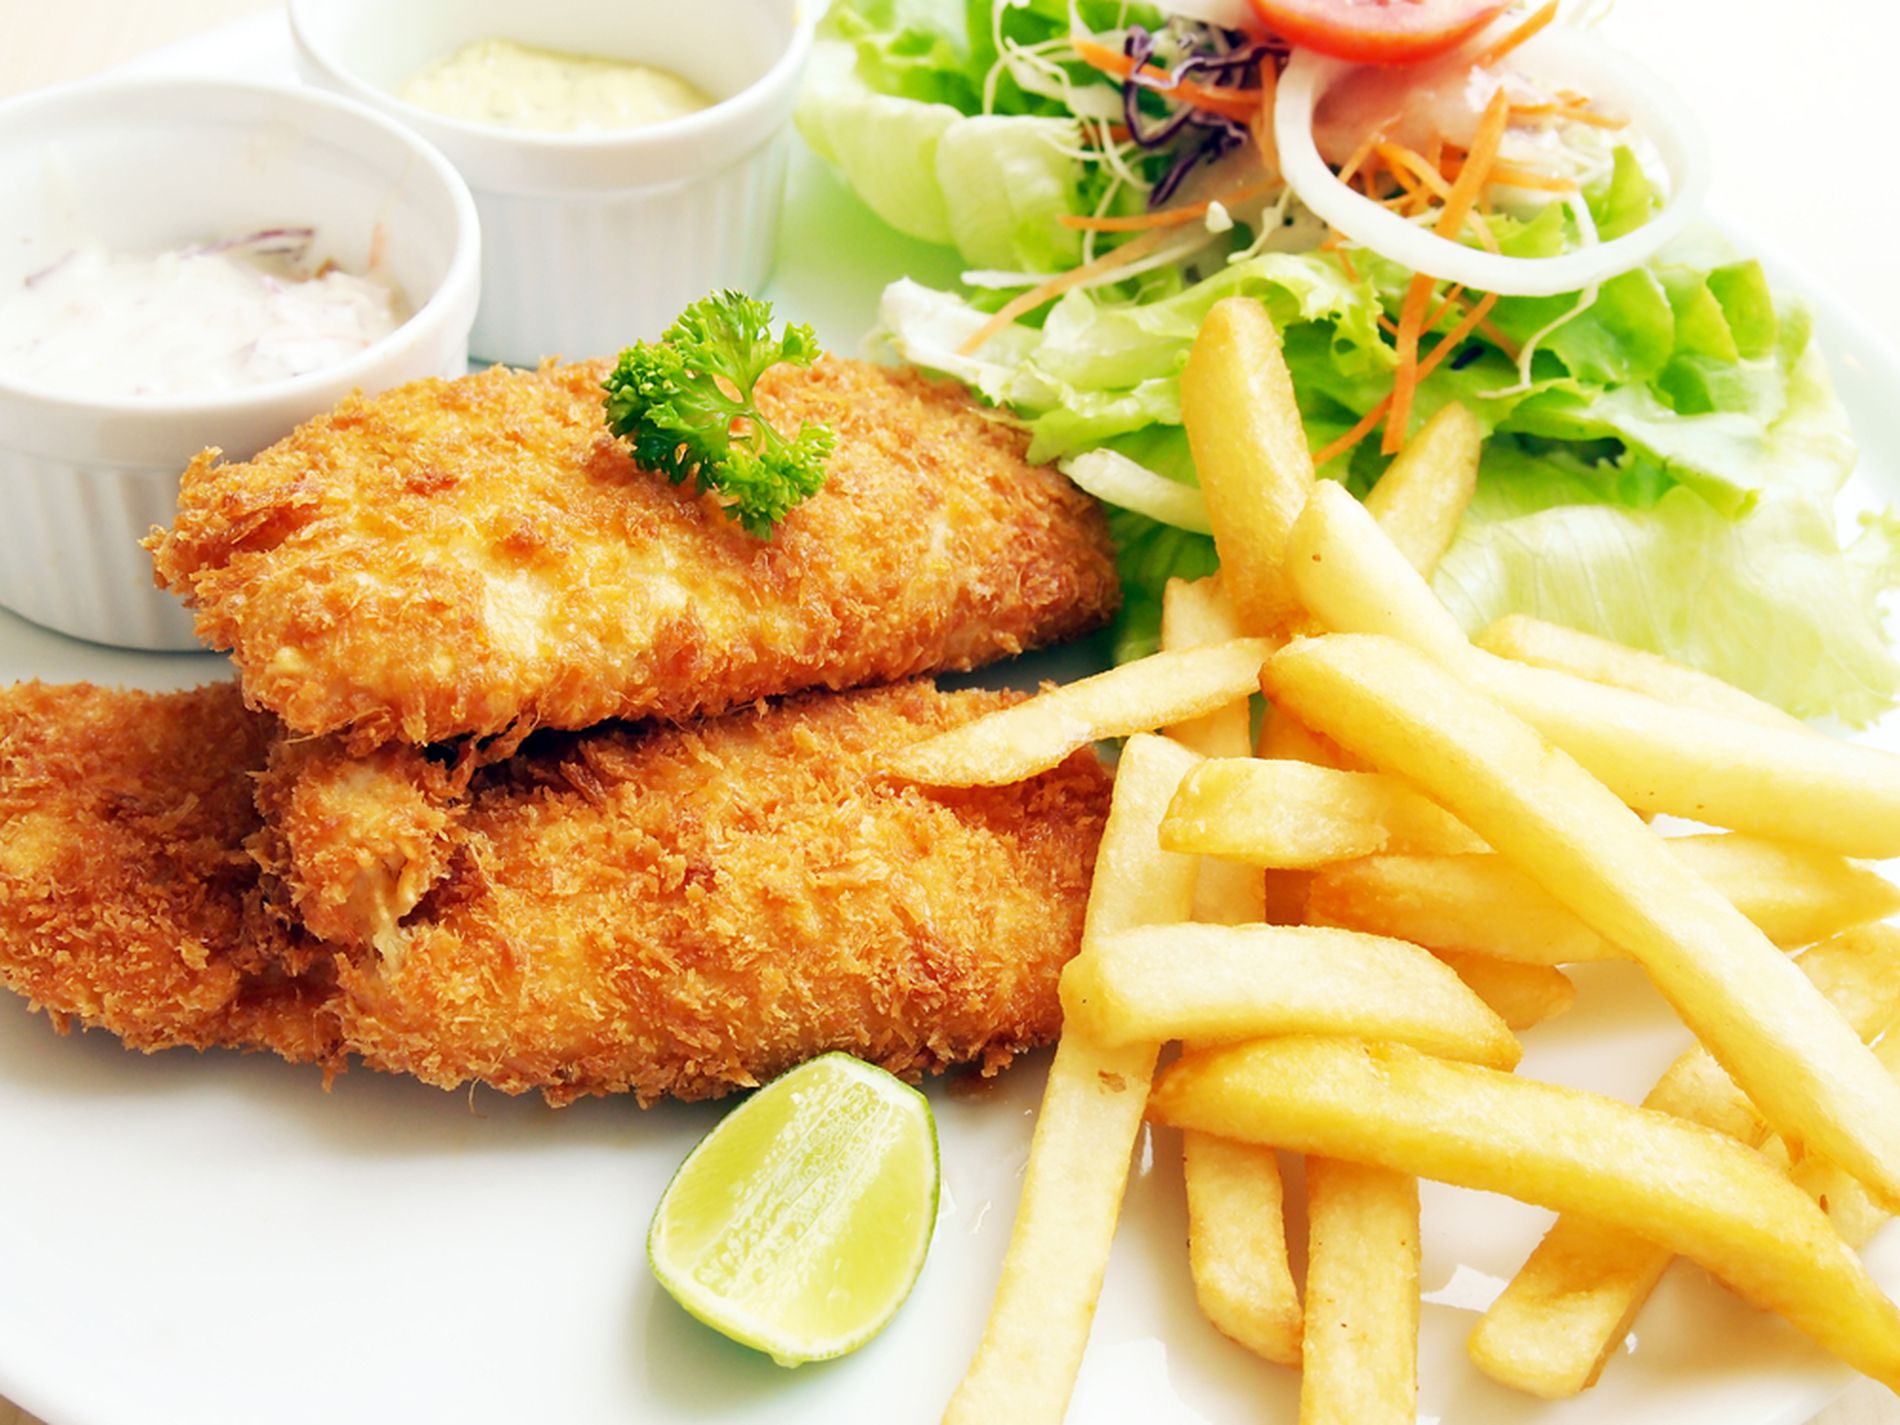 Fish and Chips Business For Sale in Caulfield